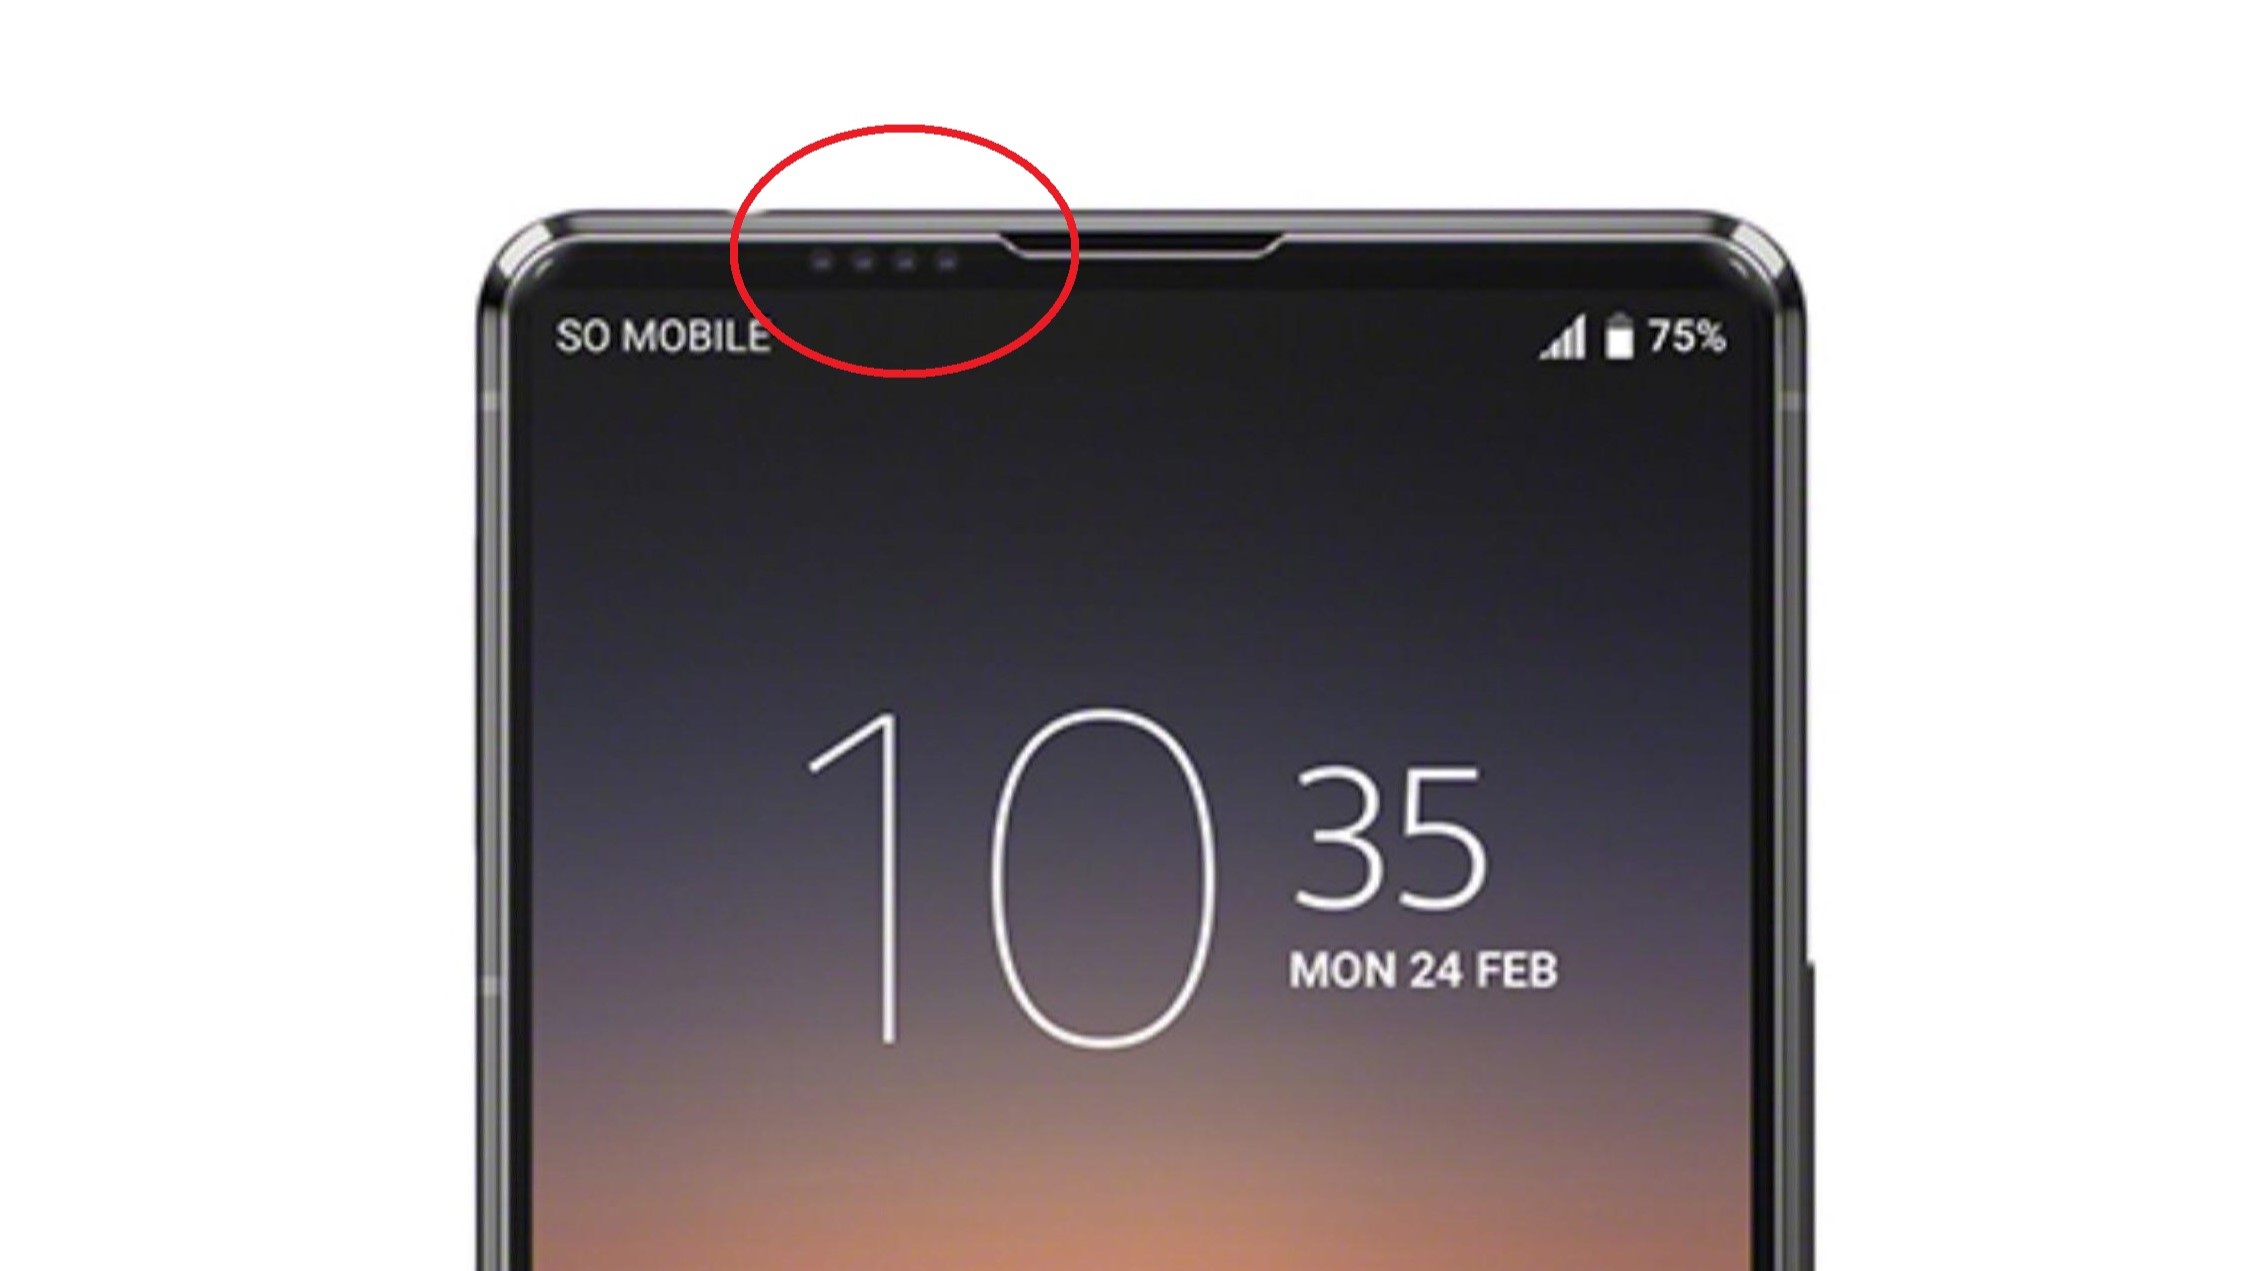 Sony Xperia 1 V to feature an ultra-micro-hole front camera that allows an almost bezel-less design without a punch hole or notch